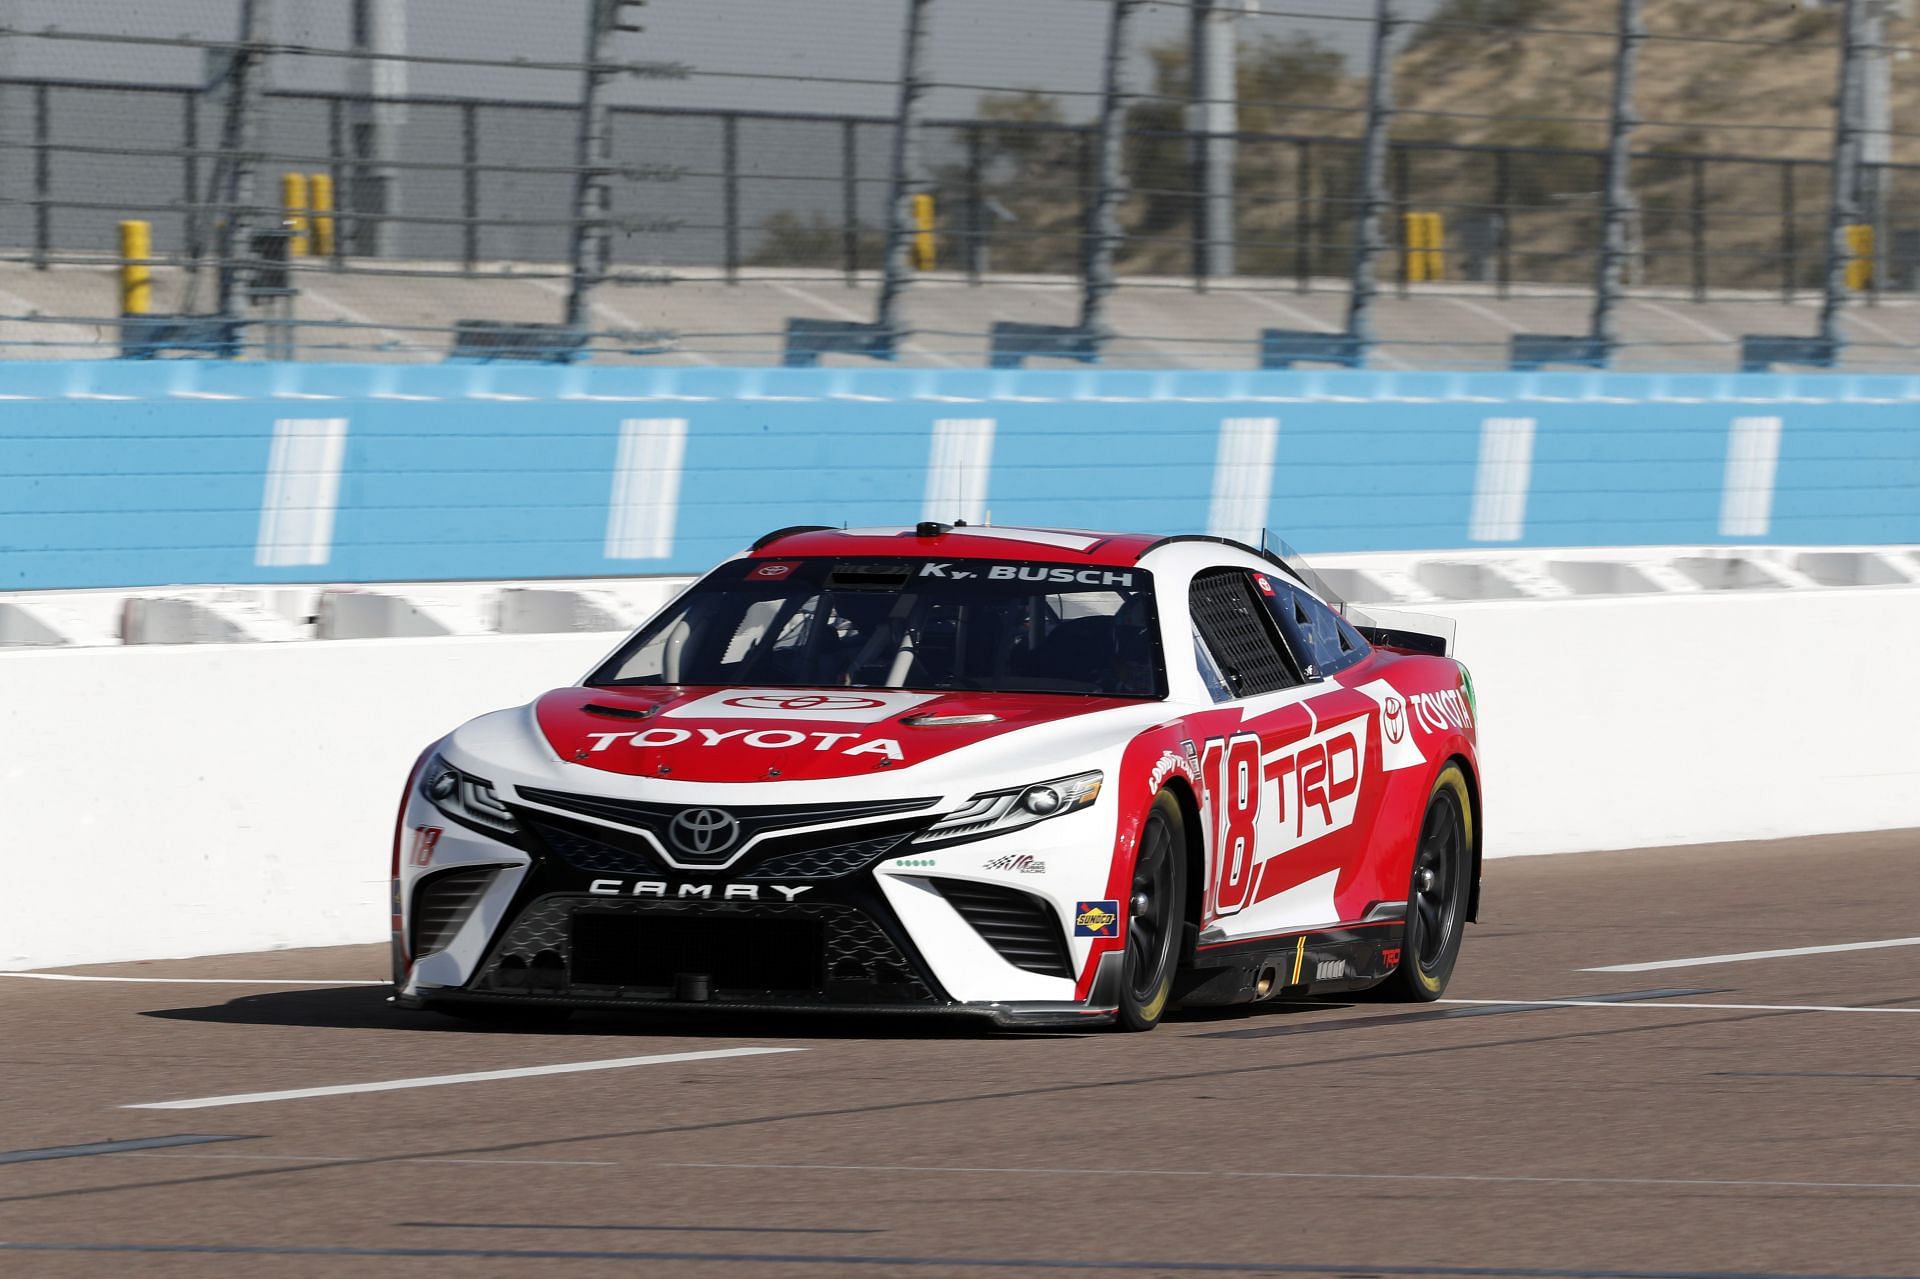 Kyle Busch drives the #18 Toyota Camry for Joe Gibbs Racing during the NASCAR Test in Phoenix (Photo by Chris Coduto/Getty Images)